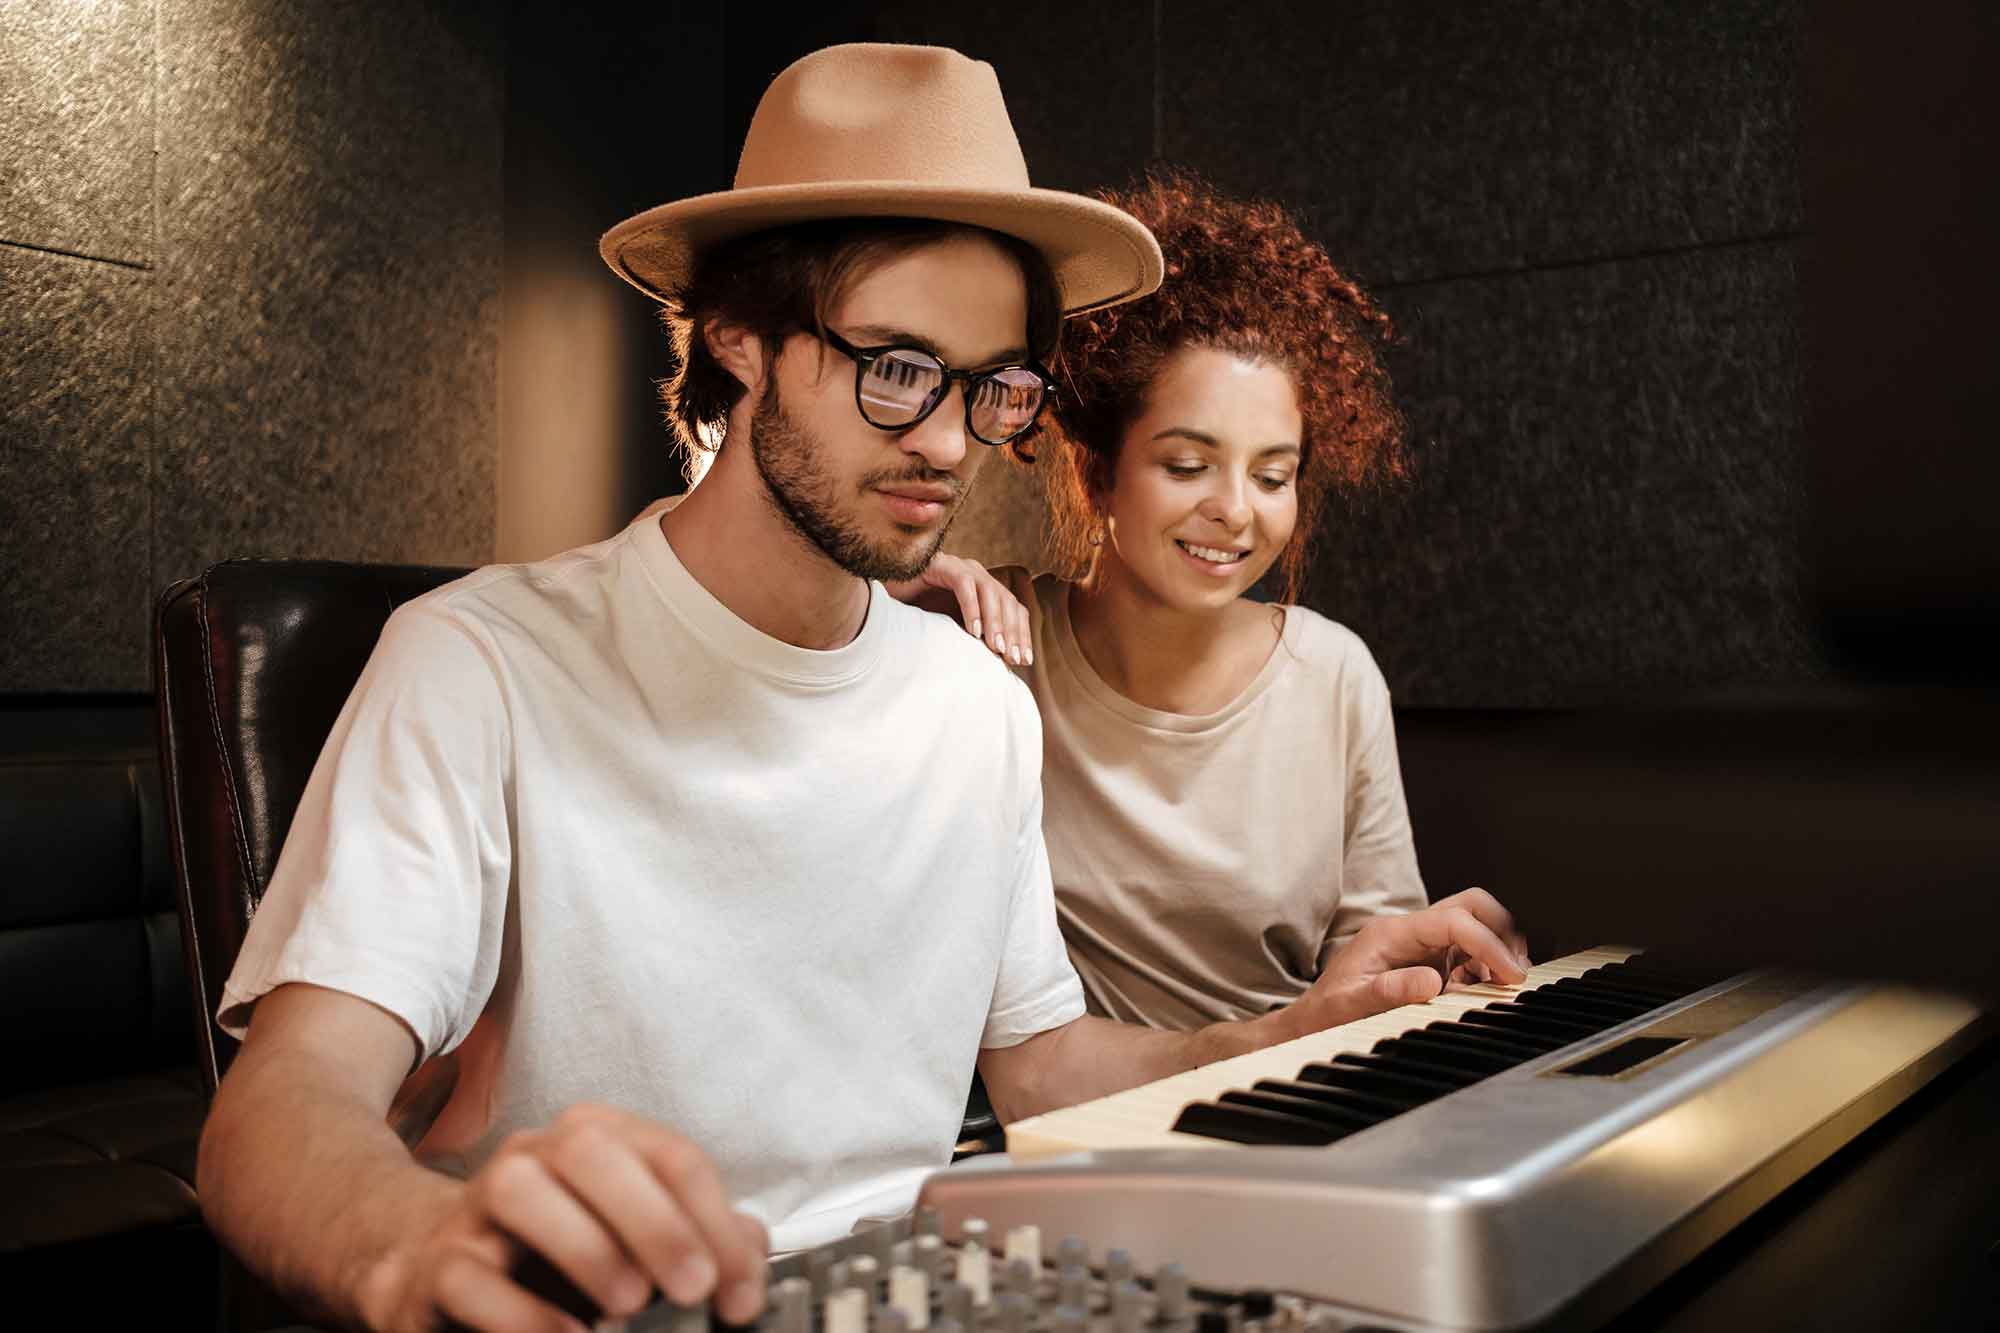 Songwriting young stylish musicians happily recording new song - voice lessons tips & tricks blog 1